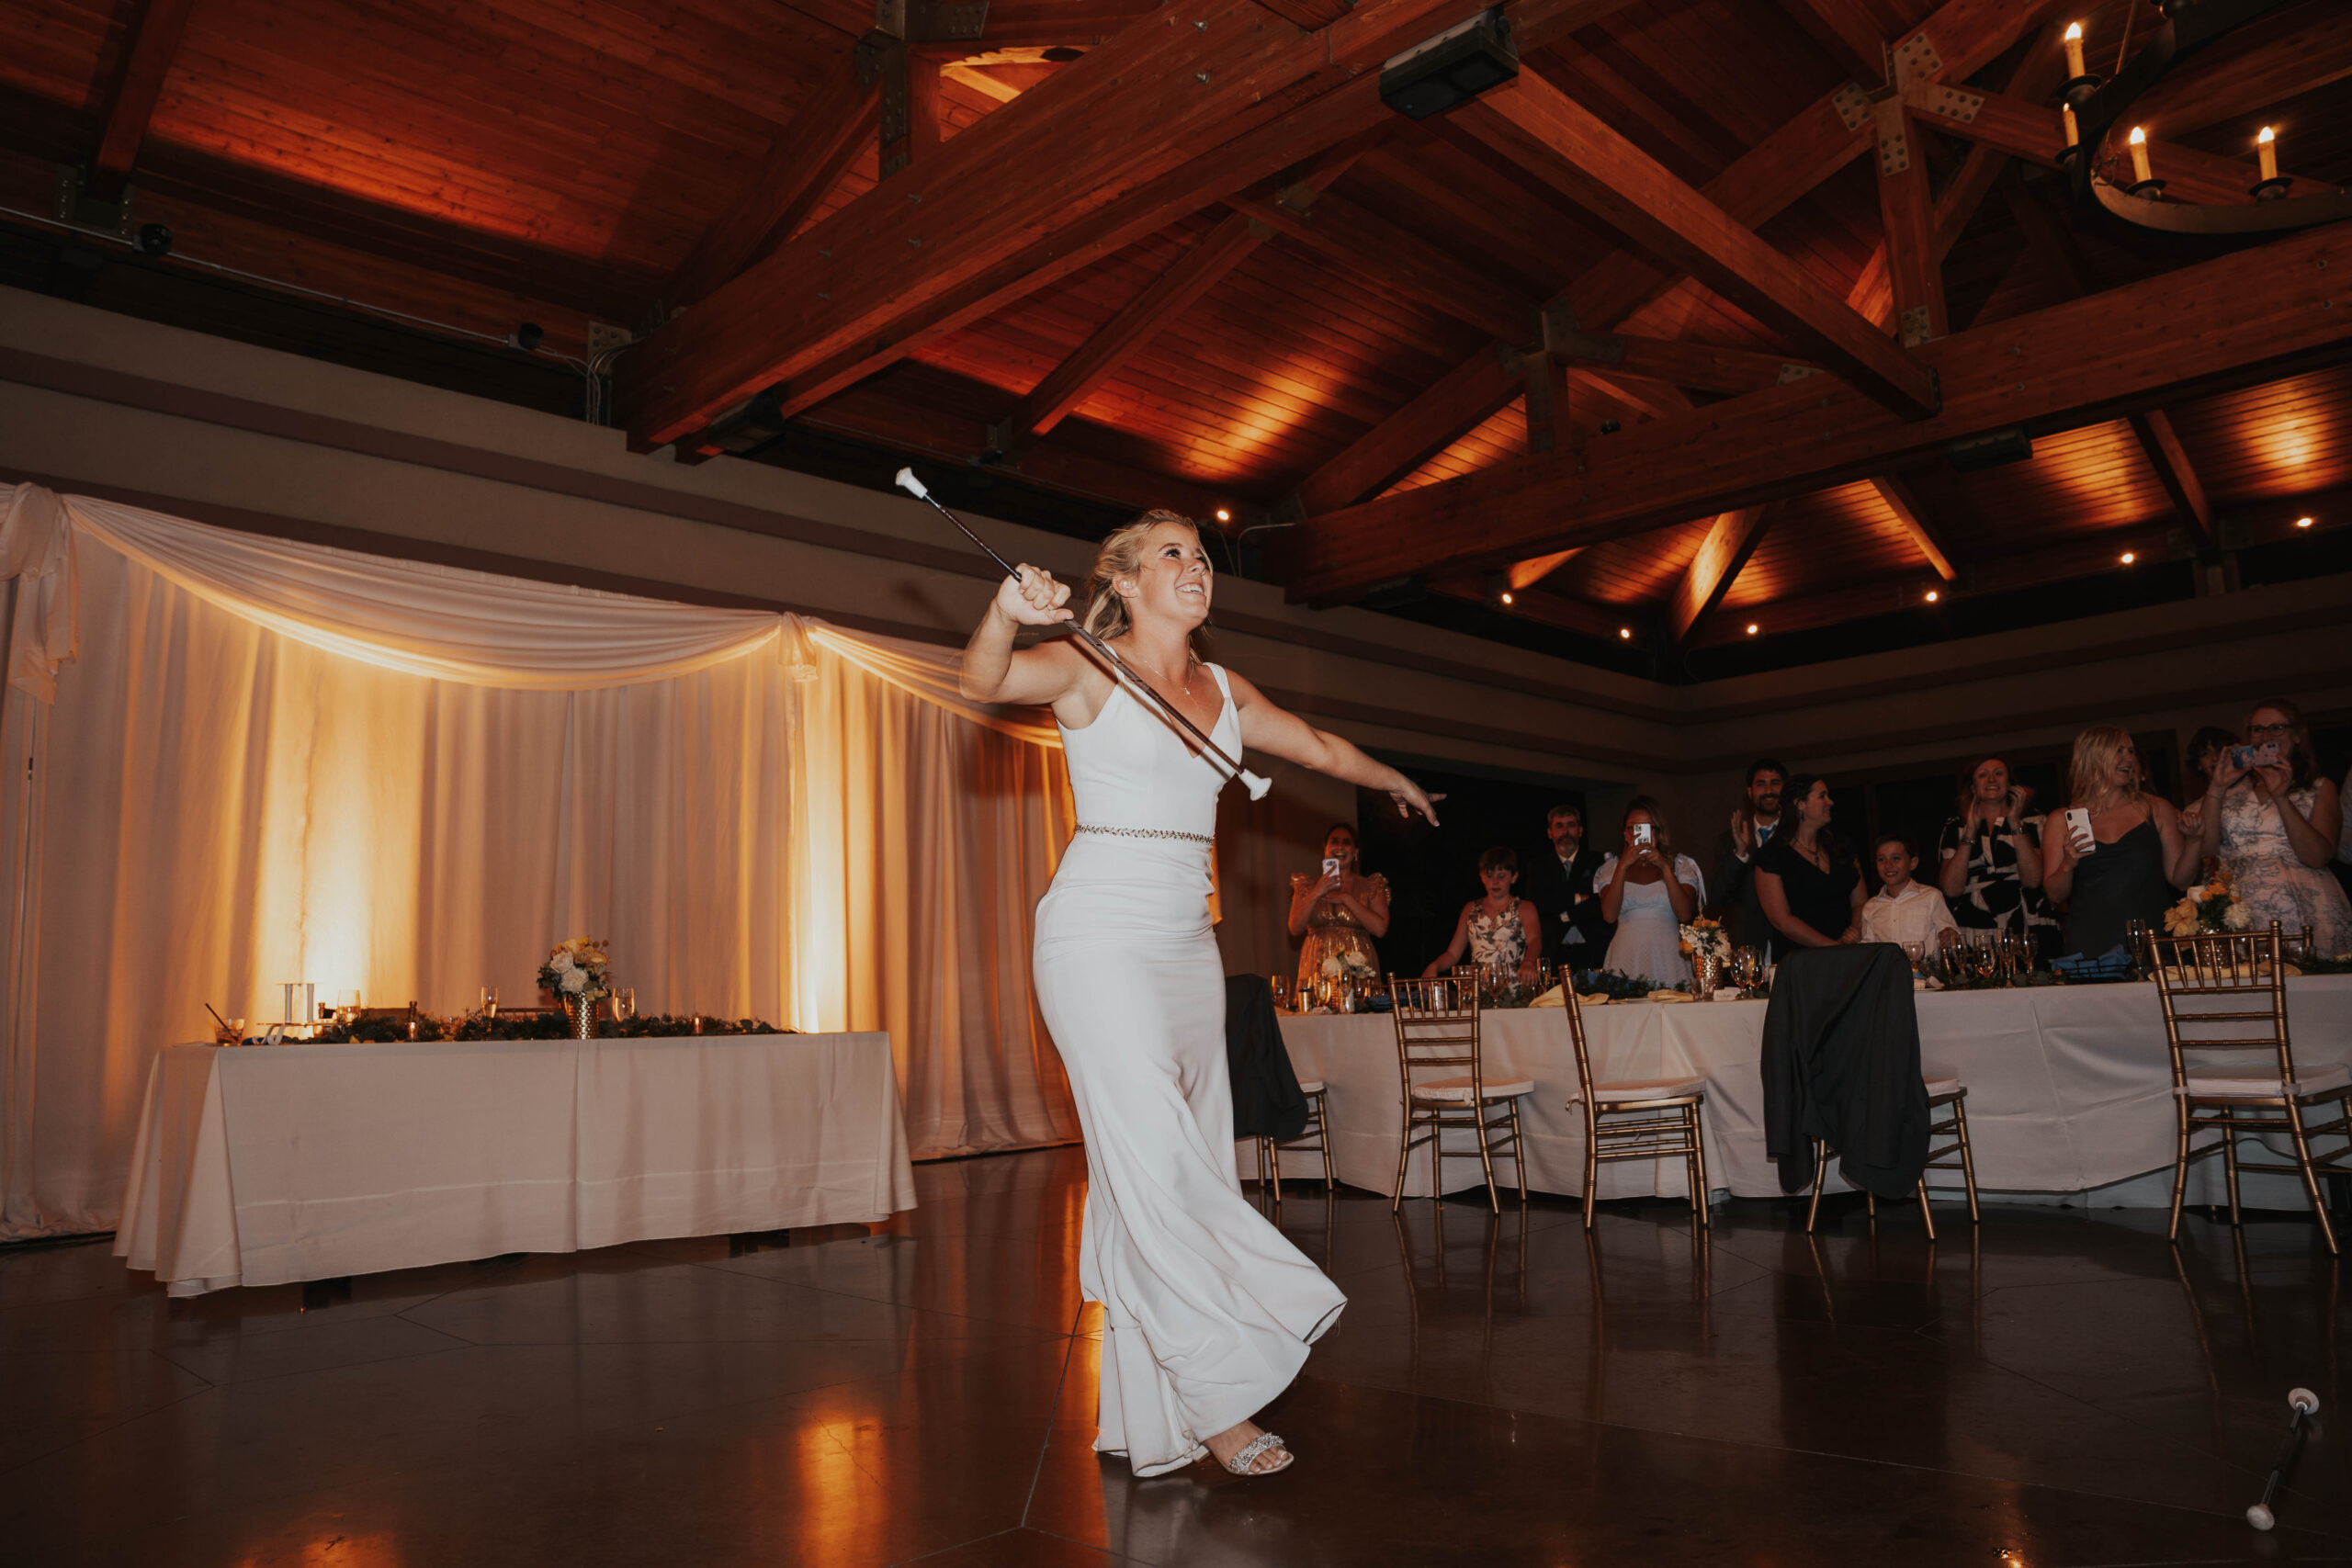 Bride Performace Batton Twirling At Wedding